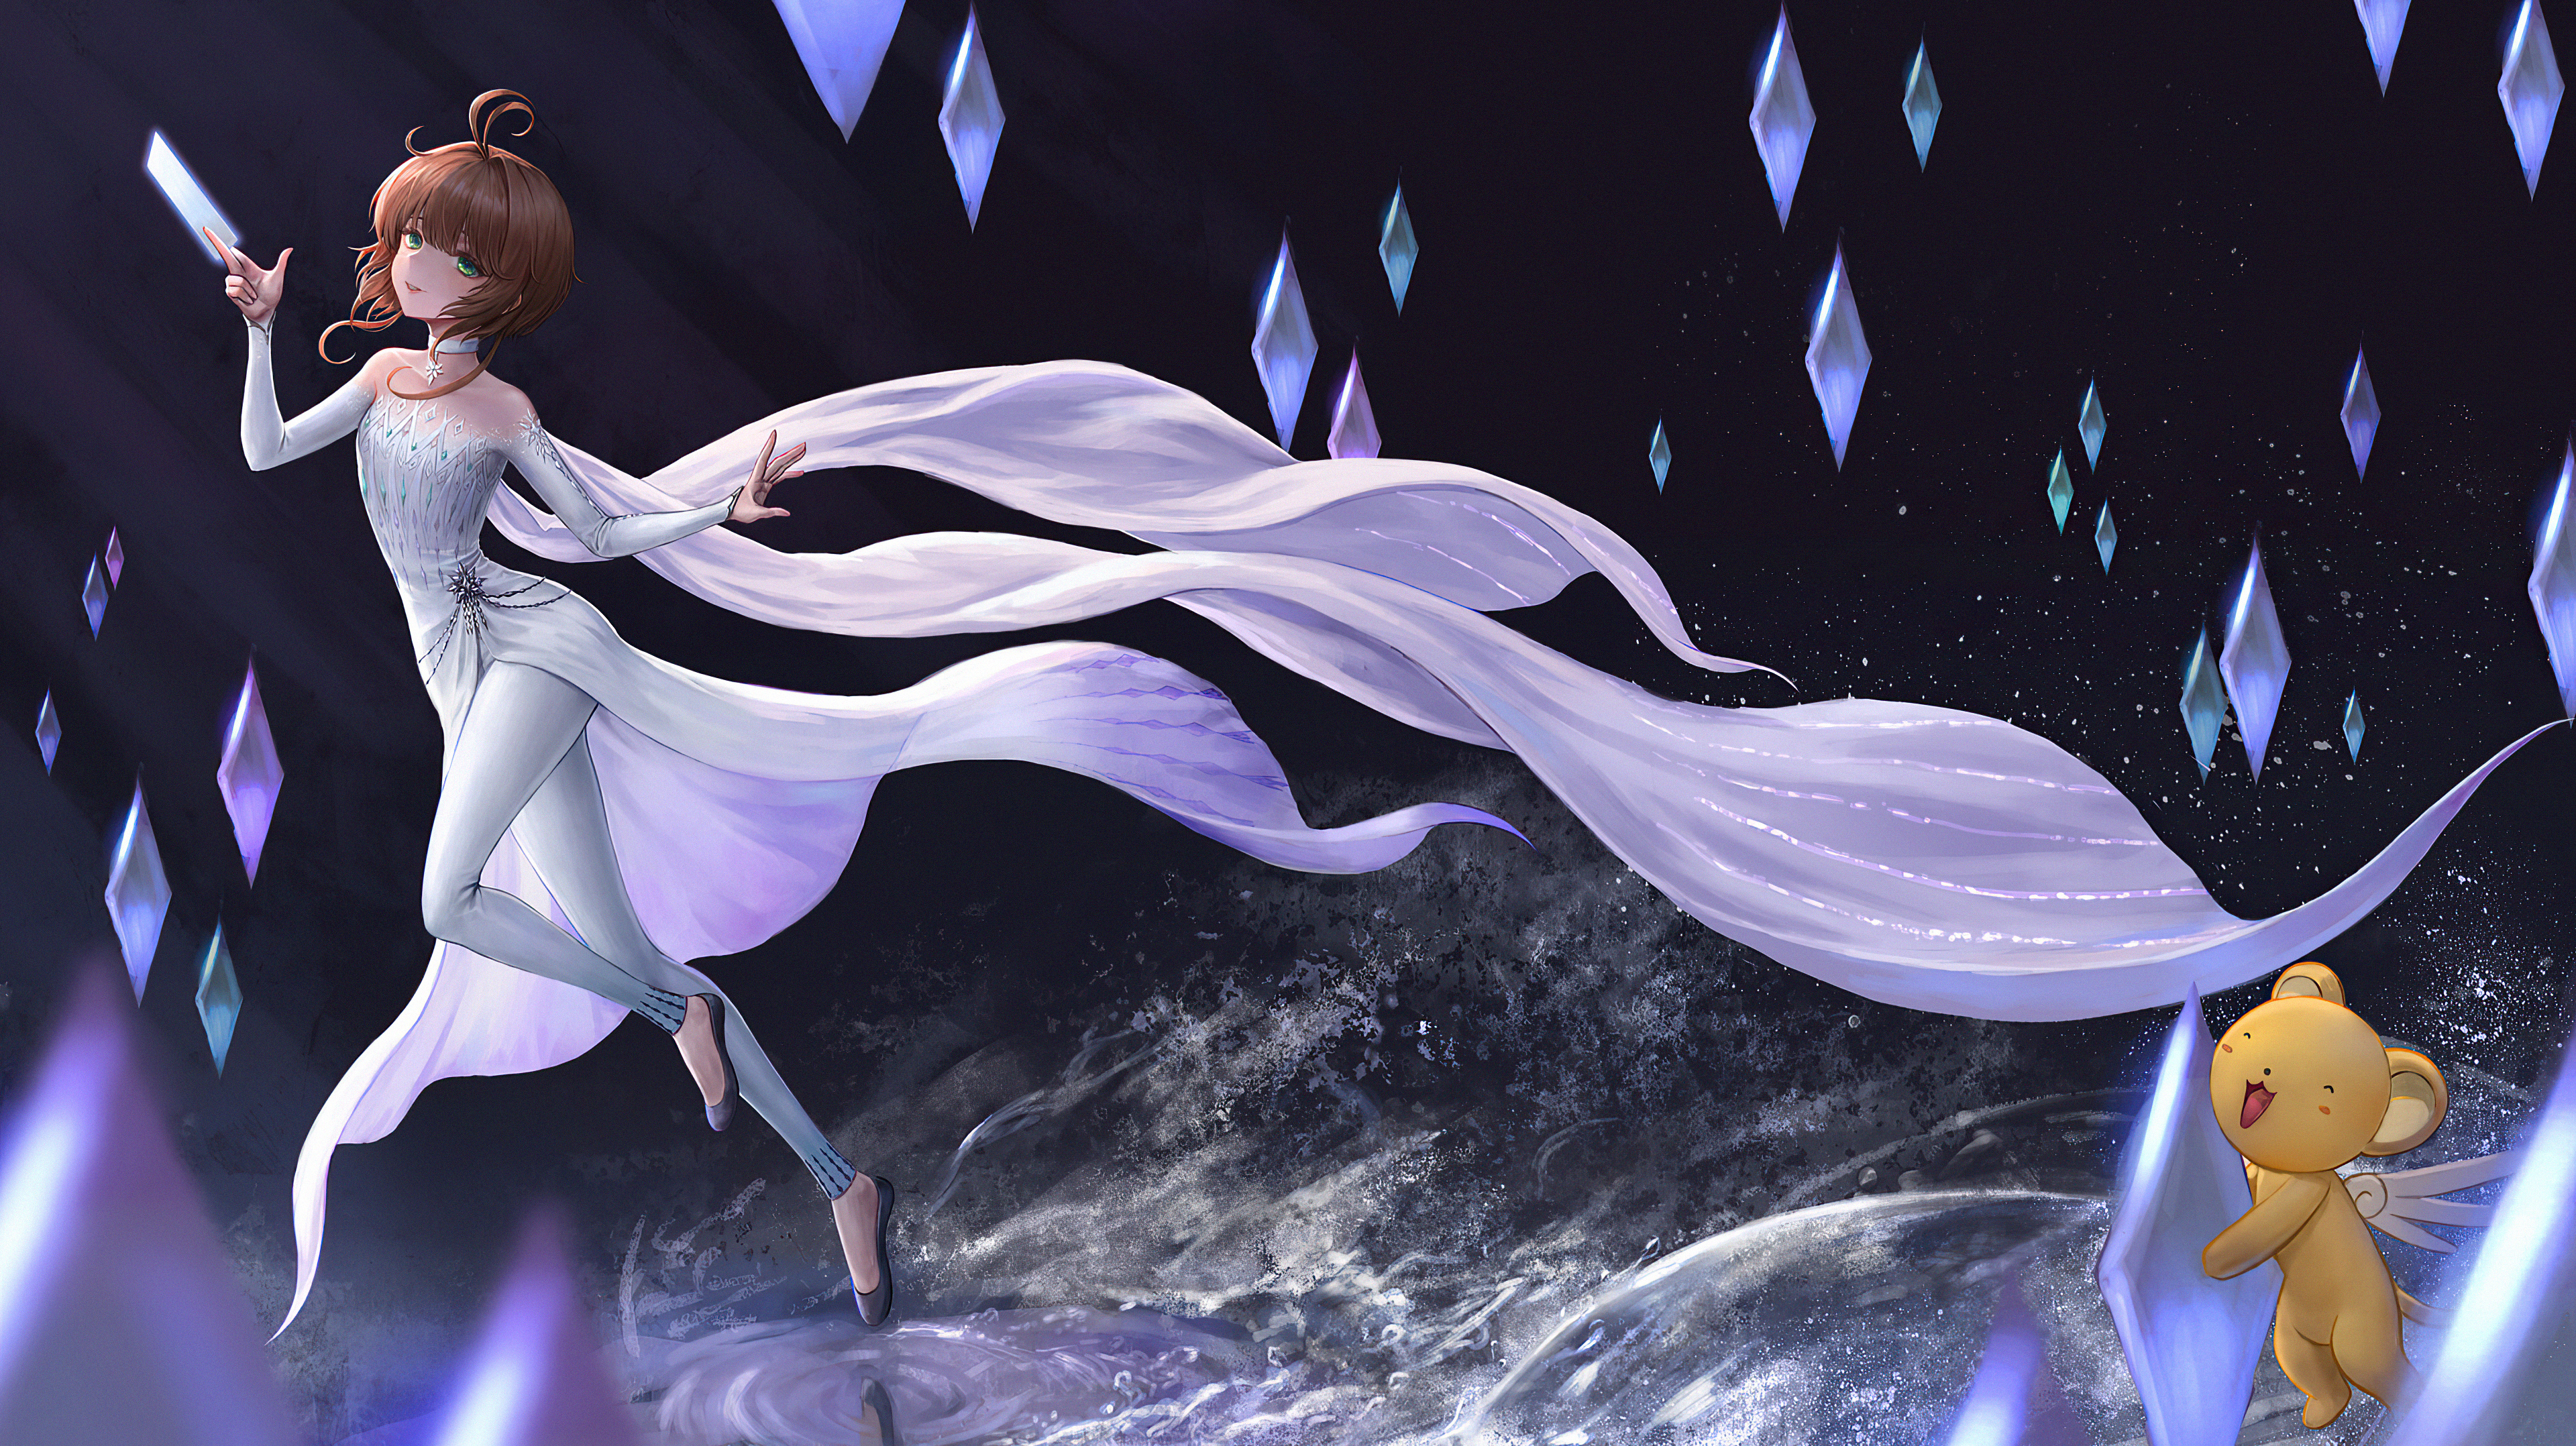 Elsa frozen anime character k hd anime k wallpapers images backgrounds photos and pictures